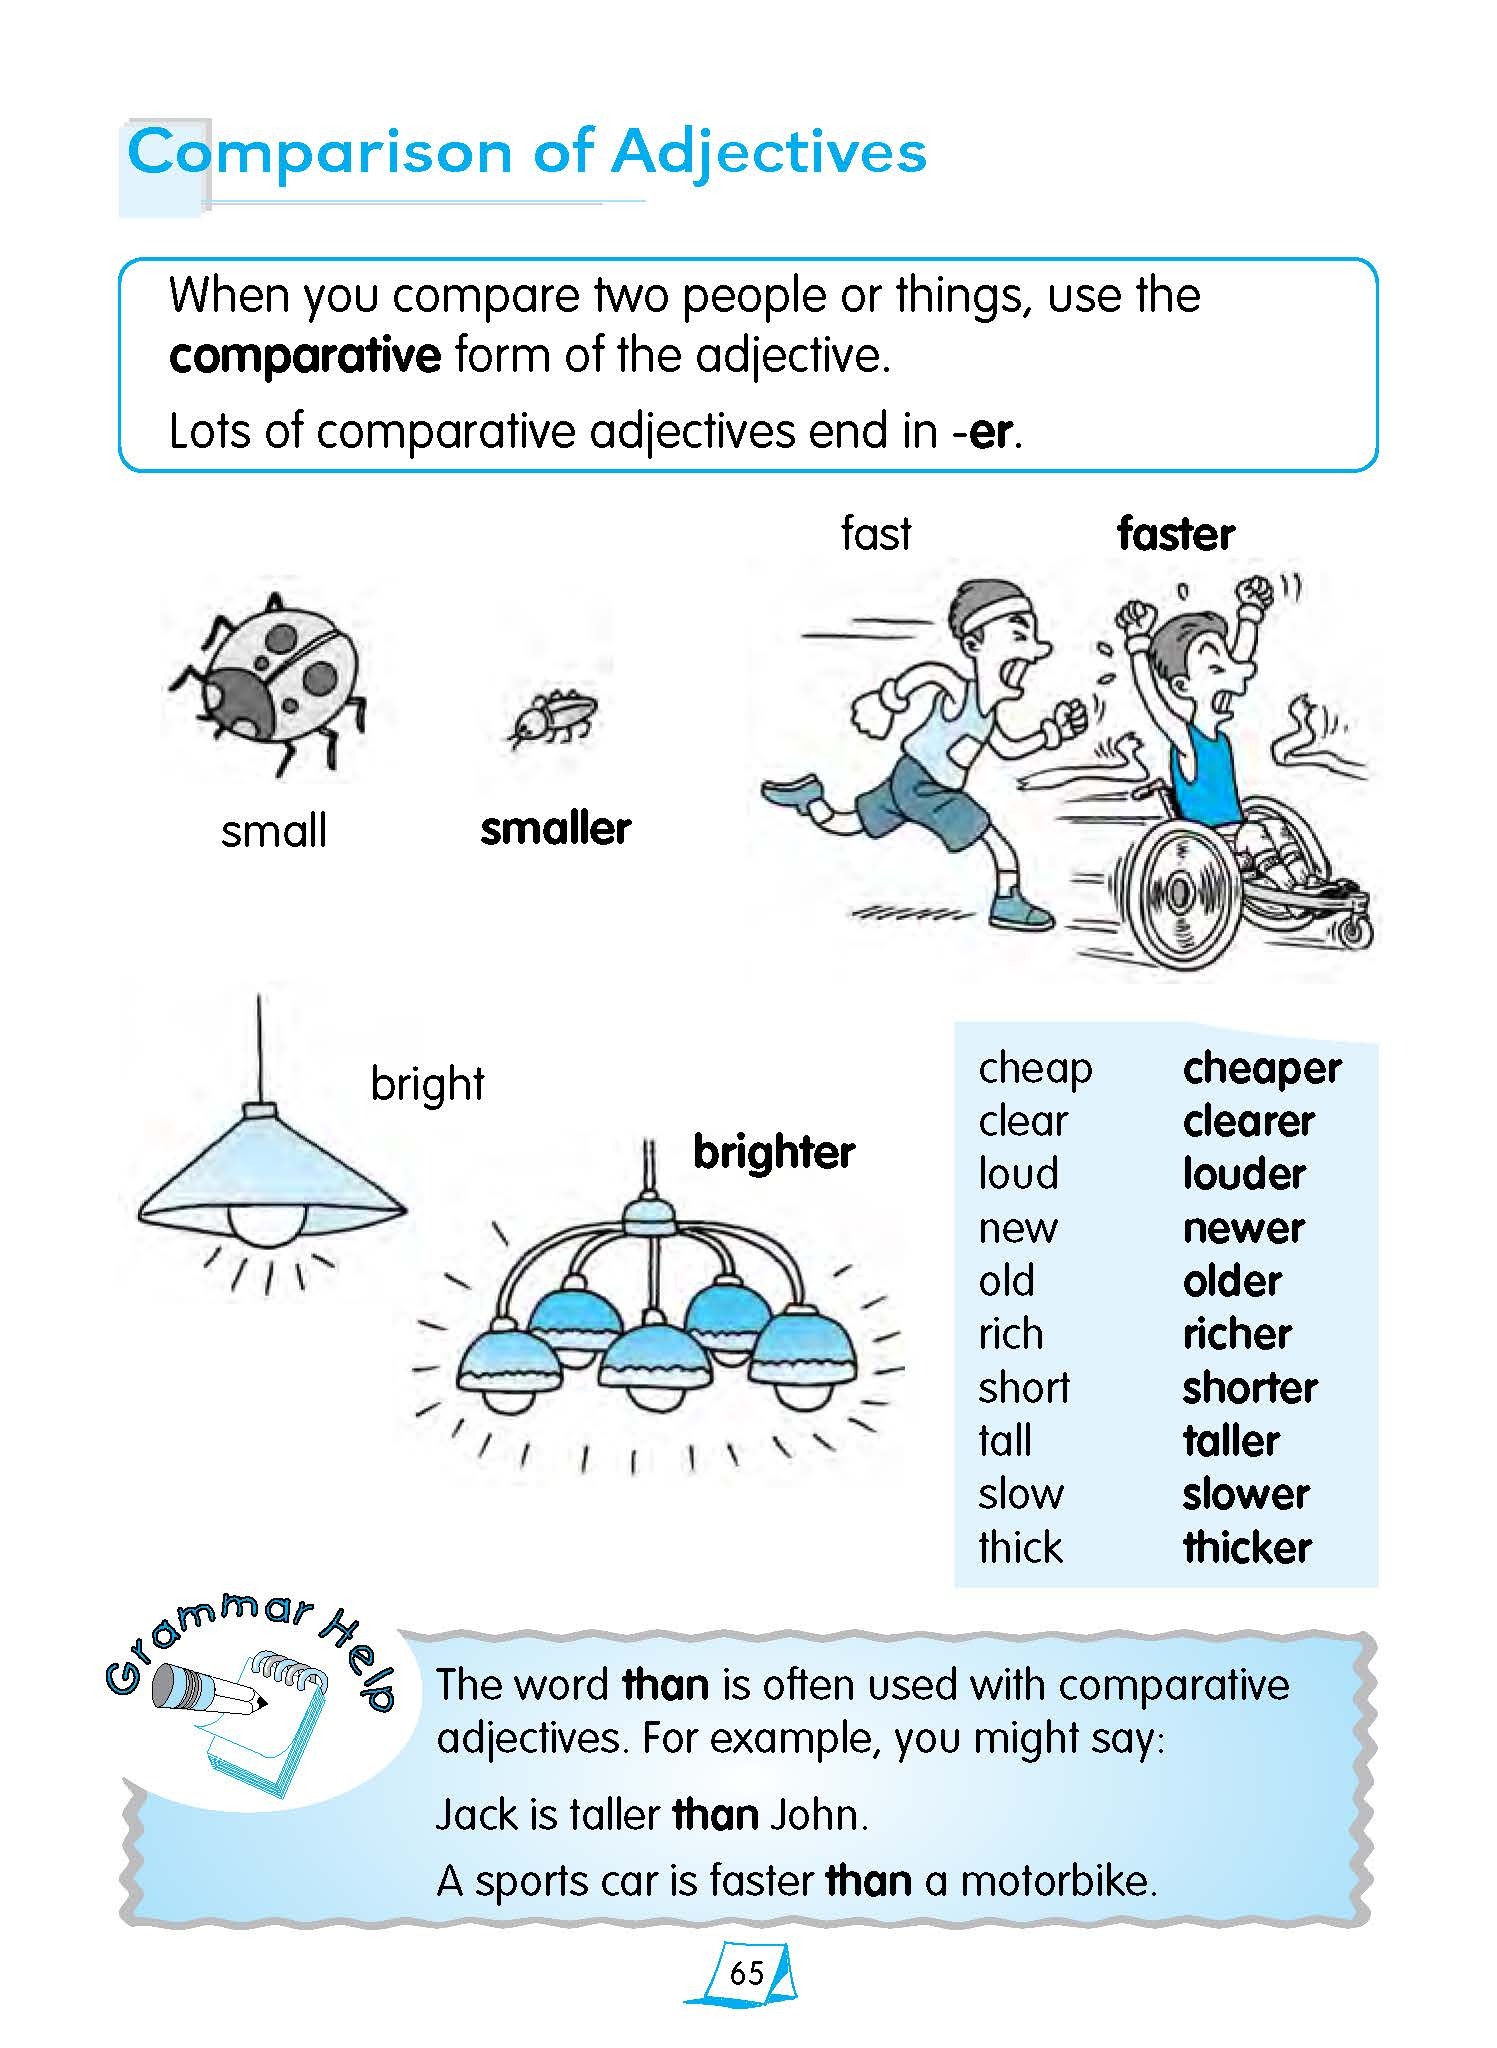 Compare 2 people. Comparative adjectives картинки. People Comparison. Comparison of adjectives of people. Compare things.